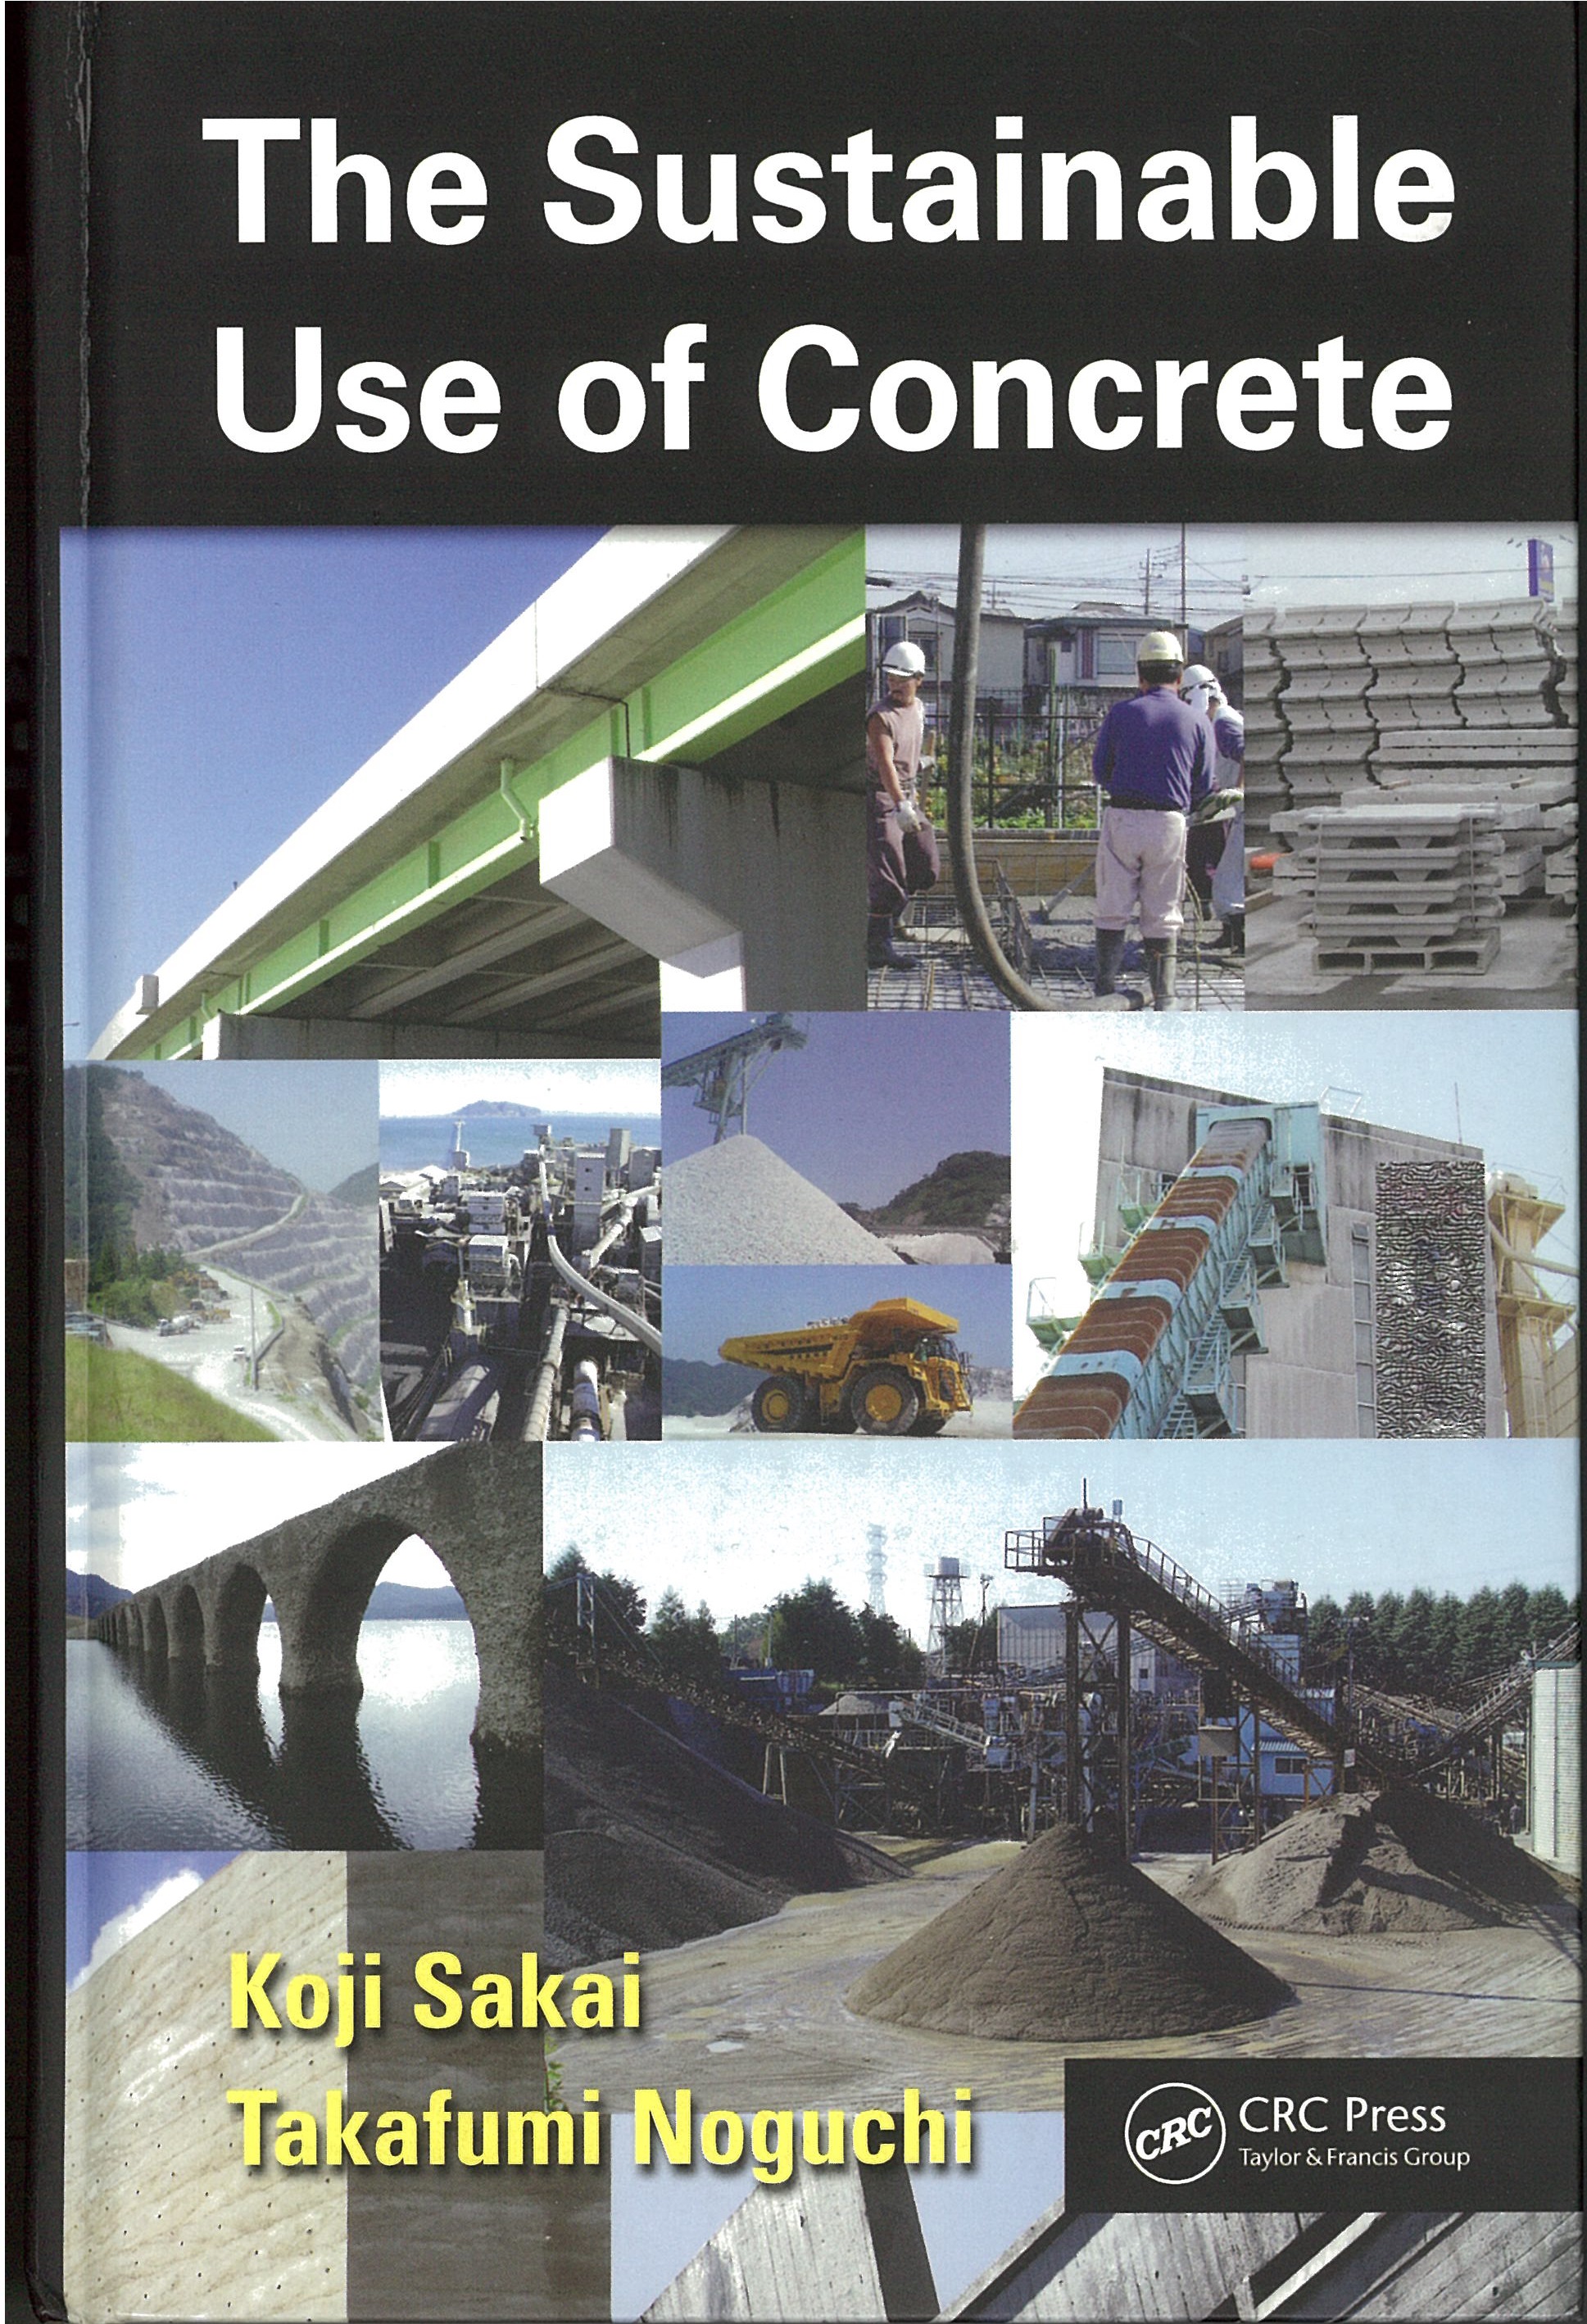 The sustainable use of concrete book cover